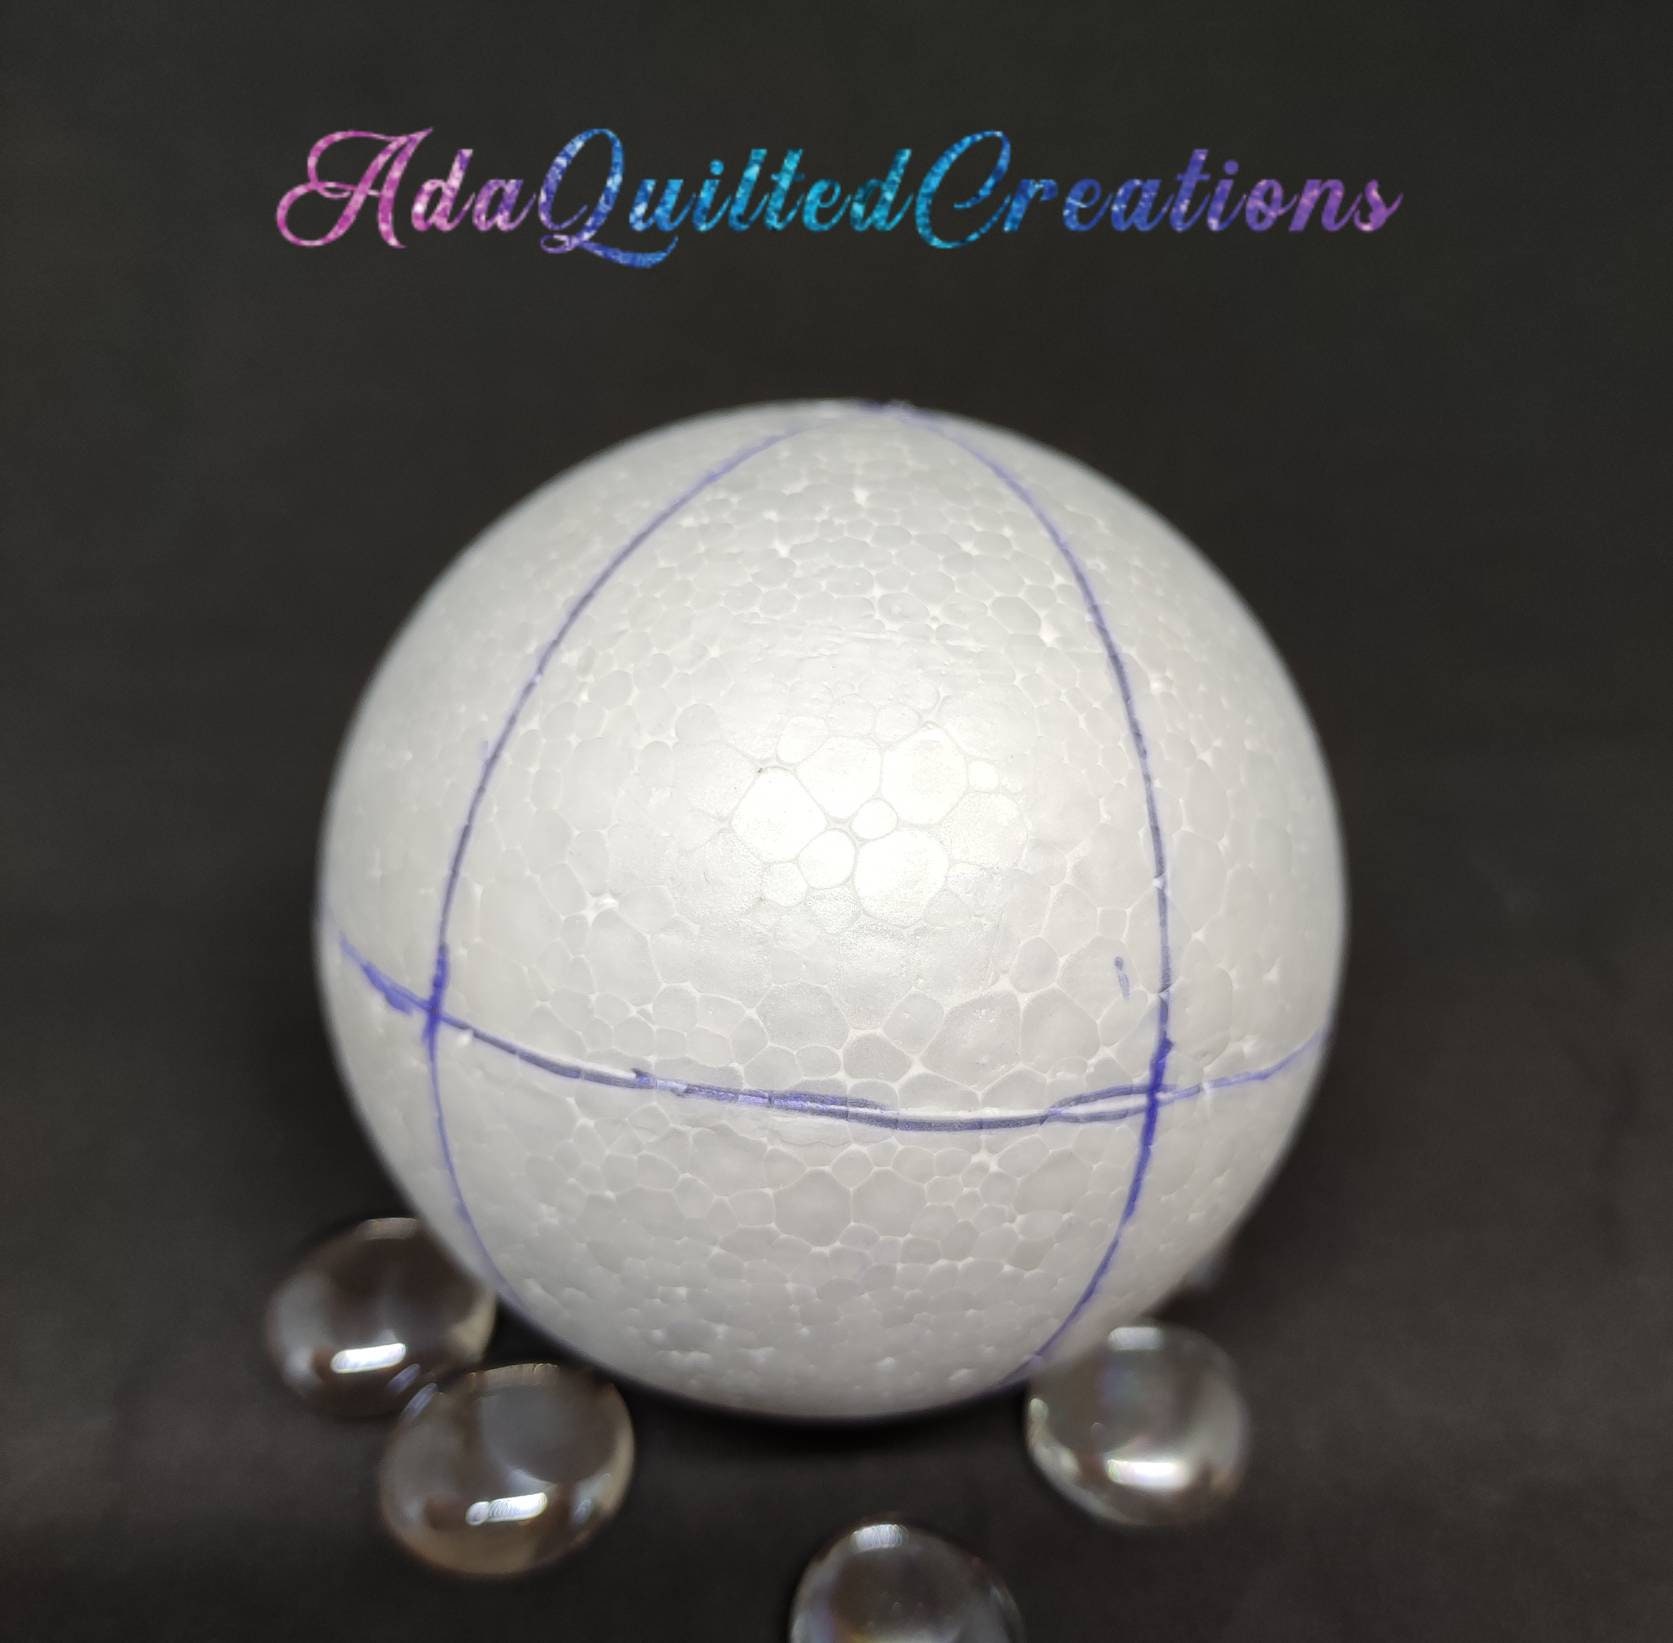 How to make a place setting with a Styrofoam ball